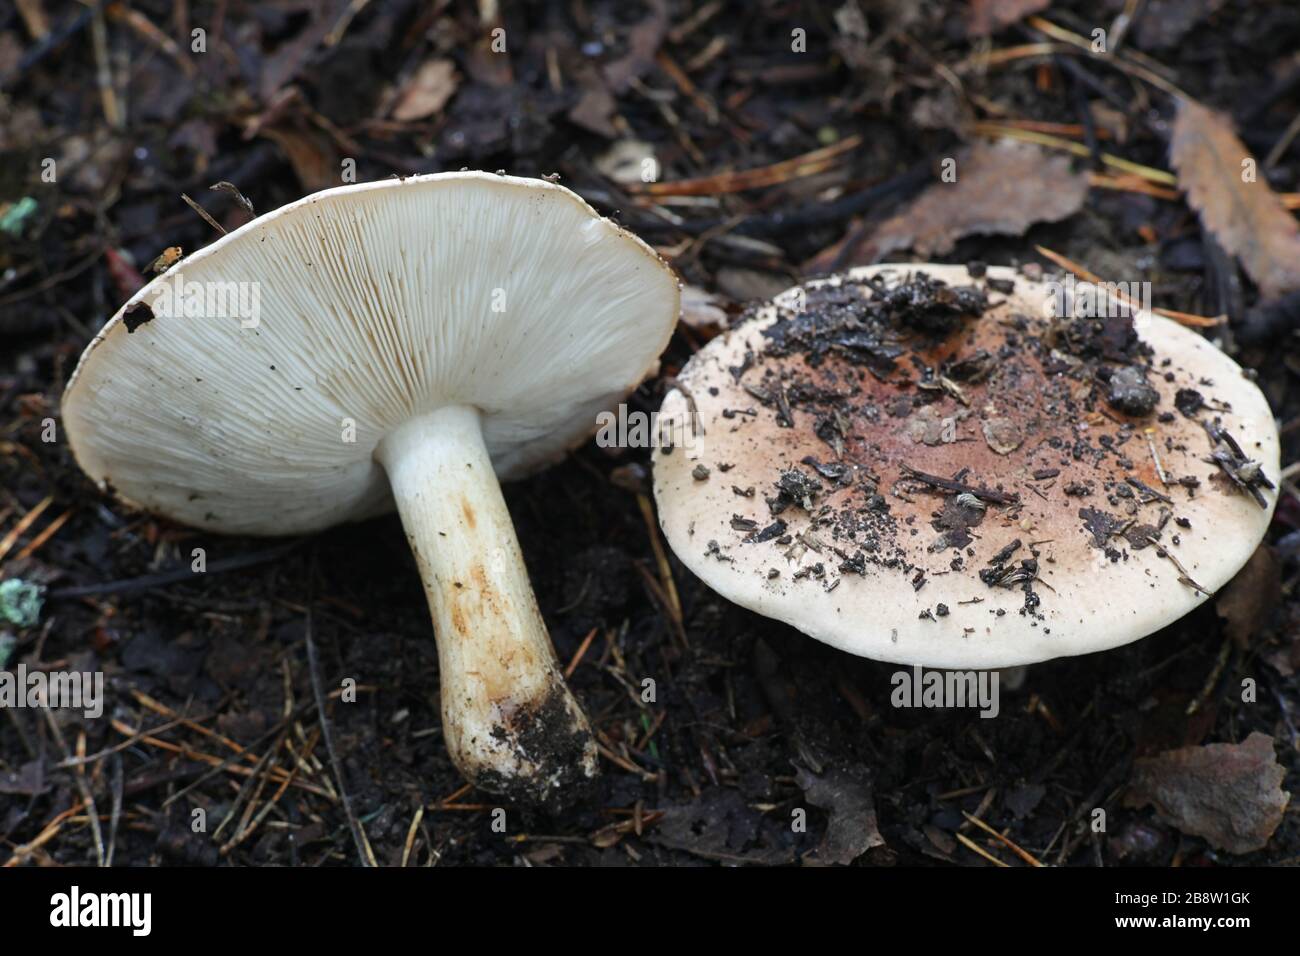 Tricholoma populinum, commonly known as the poplar knight or the cottonwood mushroom, wild fungus from Finland Stock Photo